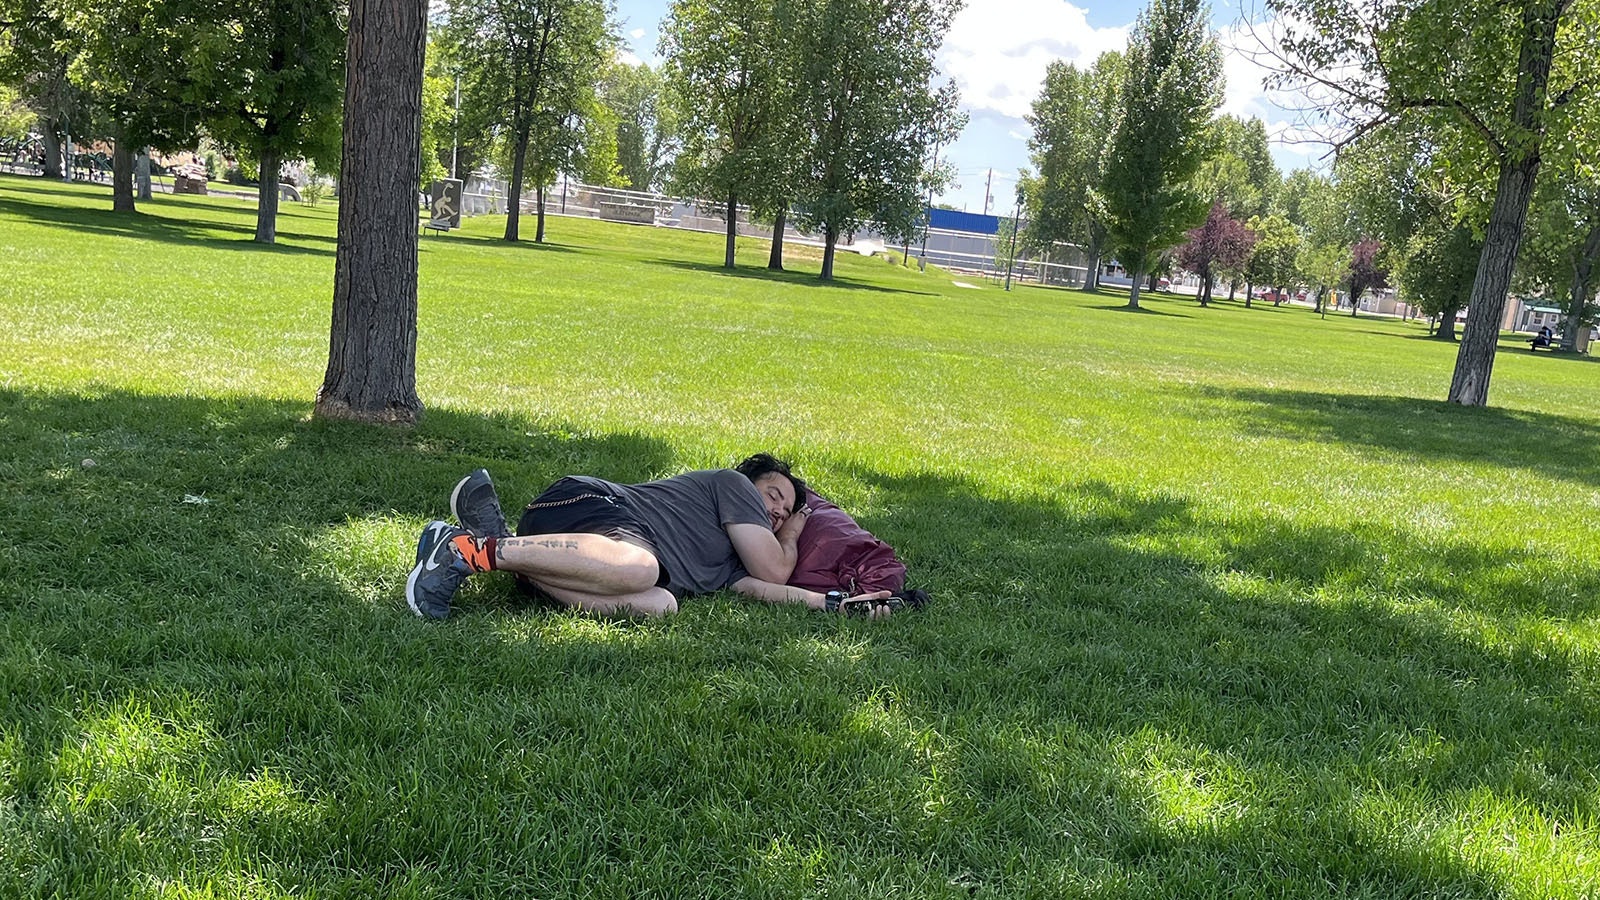 A man sleeps Tuesday in Riverton’s City Park as other wandering groups drank alcohol, joked, and asked occasional passers-by for money.